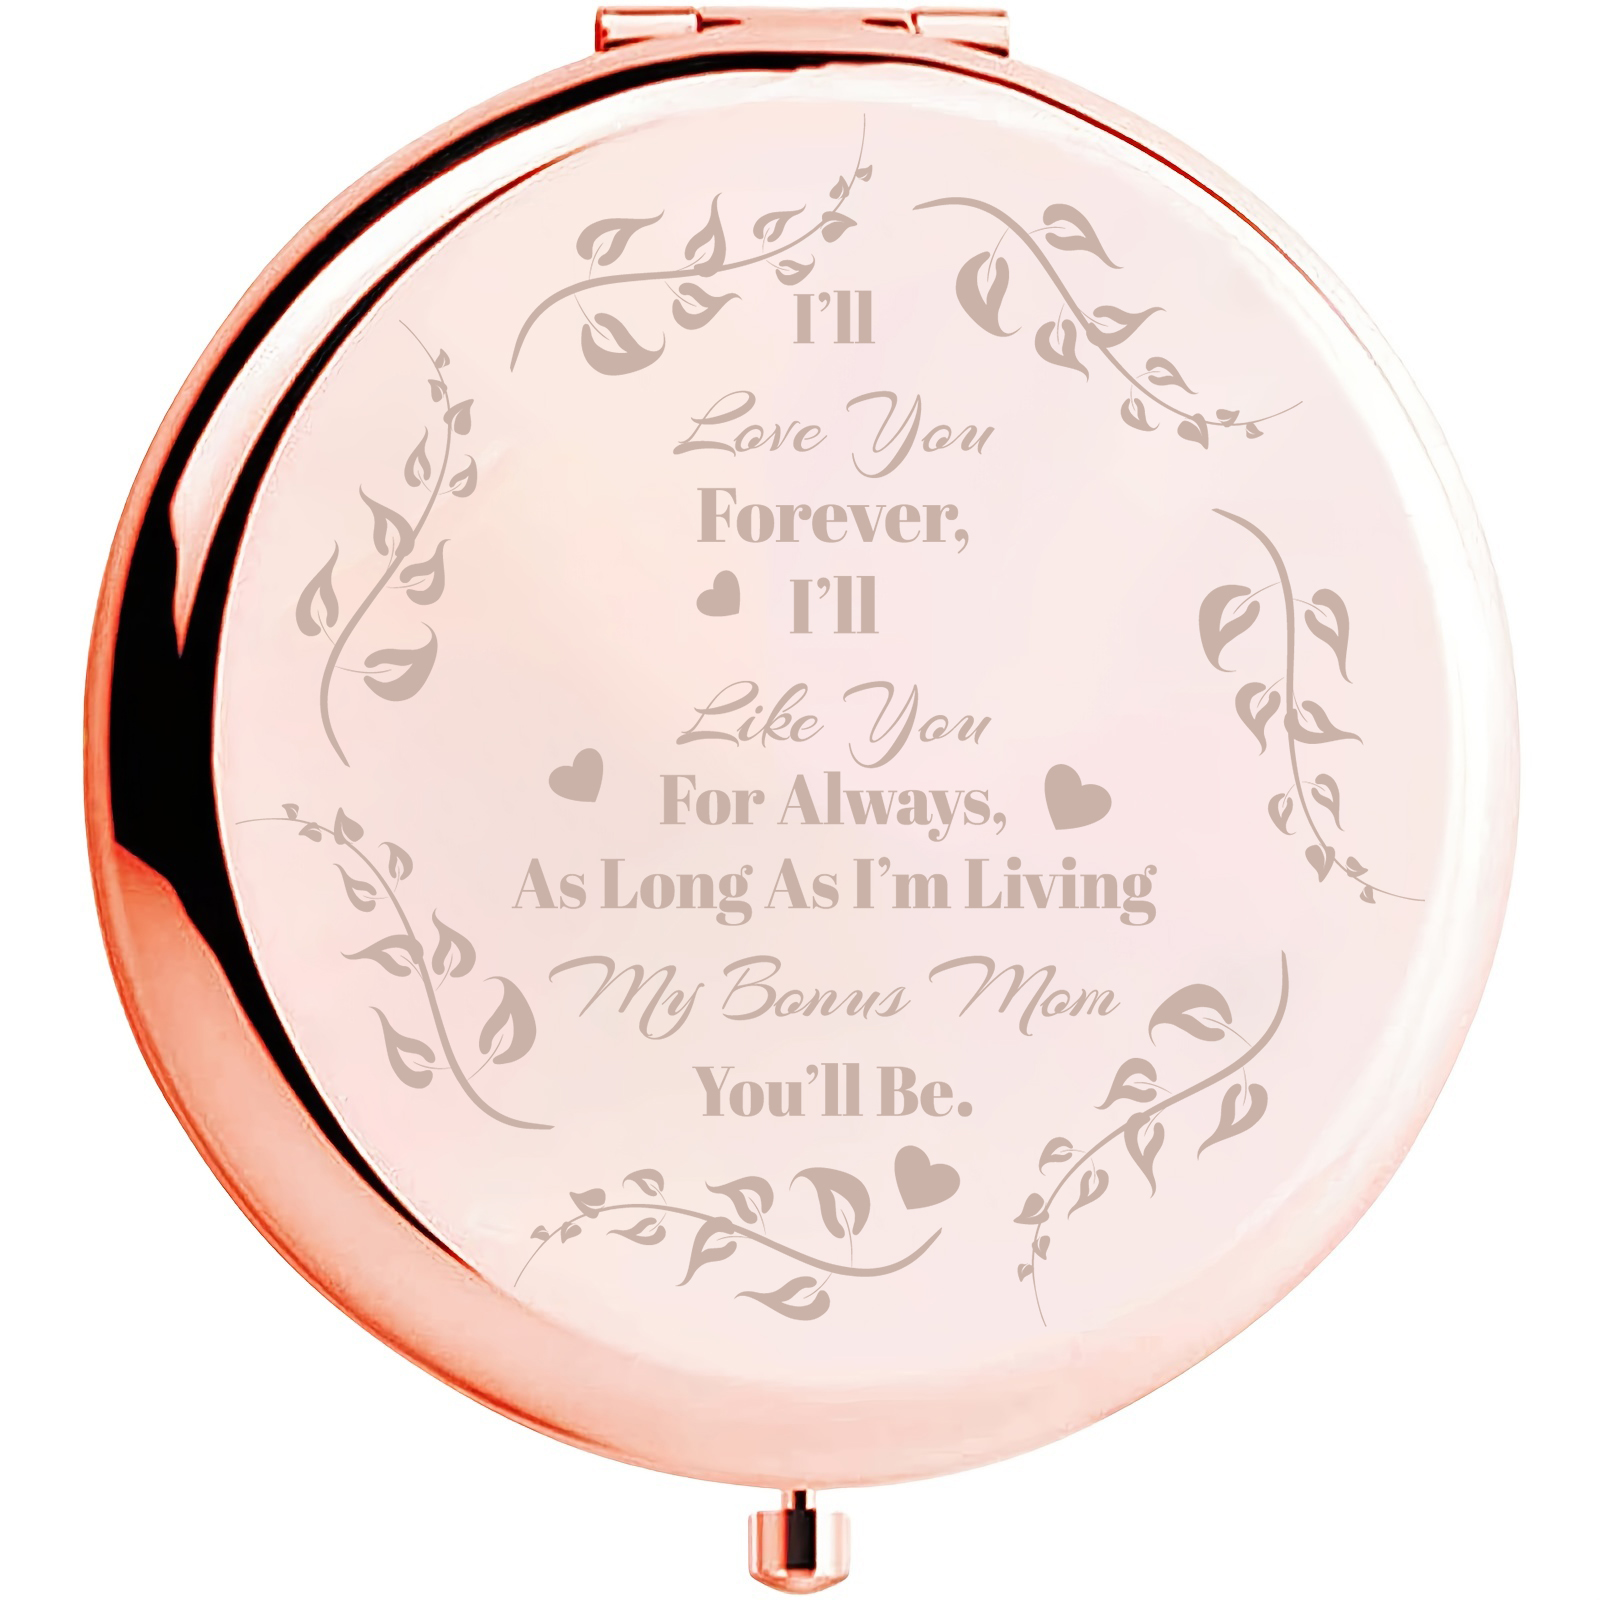 COYOAL Mom Gifts from Daughter Son Husband Engraved Compact Mirror